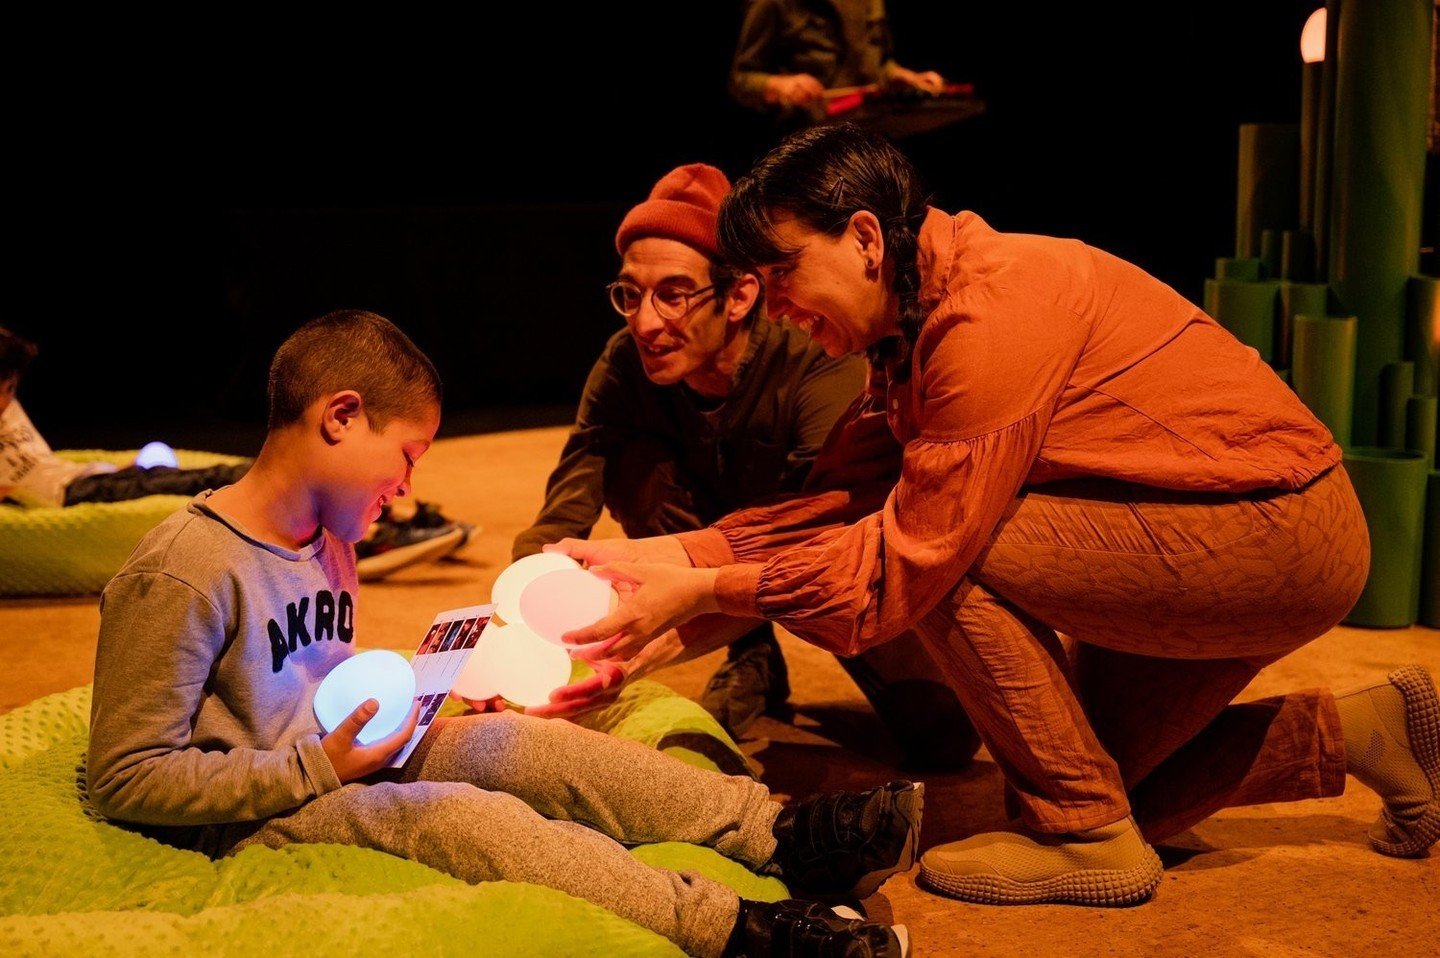 Quebec's Th&eacute;&acirc;tre Motus brings multisensory theatre to Vancouver International Children's Festival.⁠
⁠
A copresentation with @BocadelLupo, Tree and Tree: A World in Itself offer immersive experiences for babies and neurodiverse children a